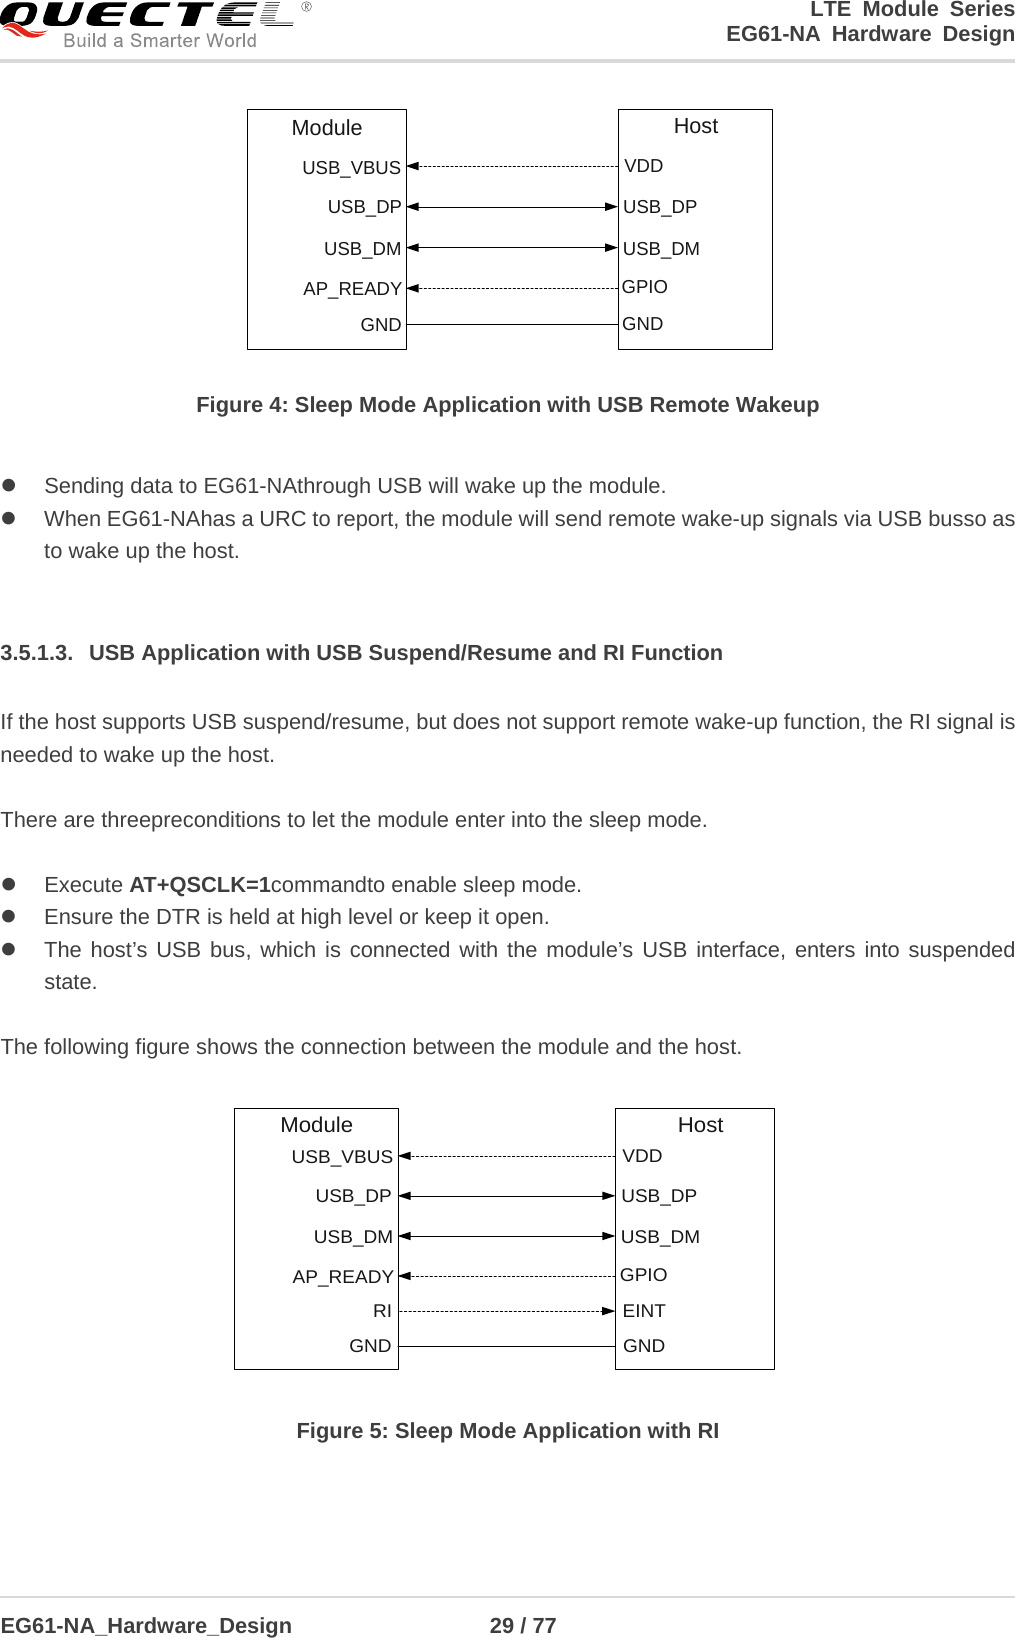 LTE Module Series                                                  EG61-NA Hardware Design  EG61-NA_Hardware_Design                  29 / 77    USB_VBUSUSB_DPUSB_DMAP_READYVDDUSB_DPUSB_DMGPIOModule HostGND GND Figure 4: Sleep Mode Application with USB Remote Wakeup   Sending data to EG61-NAthrough USB will wake up the module.    When EG61-NAhas a URC to report, the module will send remote wake-up signals via USB busso as to wake up the host.  3.5.1.3. USB Application with USB Suspend/Resume and RI Function If the host supports USB suspend/resume, but does not support remote wake-up function, the RI signal is needed to wake up the host.    There are threepreconditions to let the module enter into the sleep mode.   Execute AT+QSCLK=1commandto enable sleep mode.  Ensure the DTR is held at high level or keep it open.  The host’s USB bus, which is connected with the module’s USB interface, enters into suspended state.  The following figure shows the connection between the module and the host. USB_VBUSUSB_DPUSB_DMAP_READYVDDUSB_DPUSB_DMGPIOModule HostGND GNDRI EINT Figure 5: Sleep Mode Application with RI   